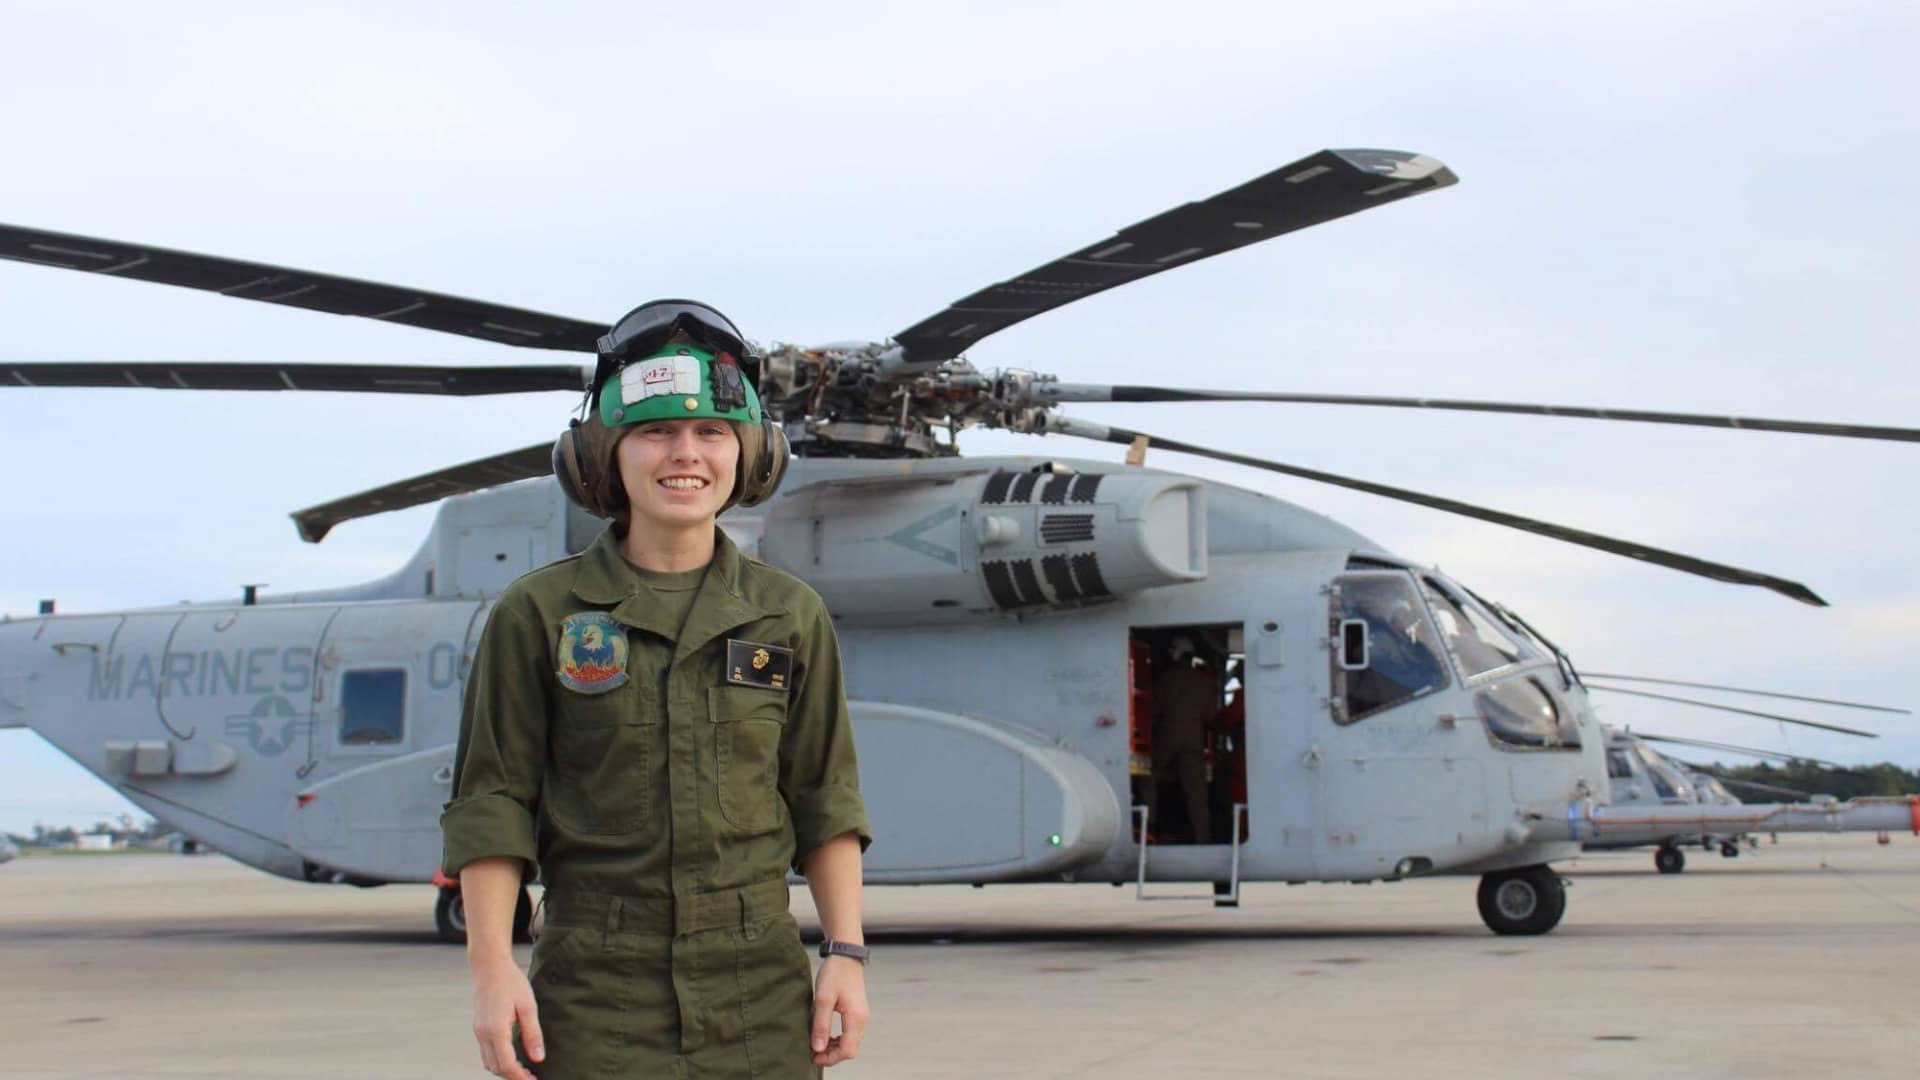 Erin Martin while working as a Marine Corps helicopter mechanic.